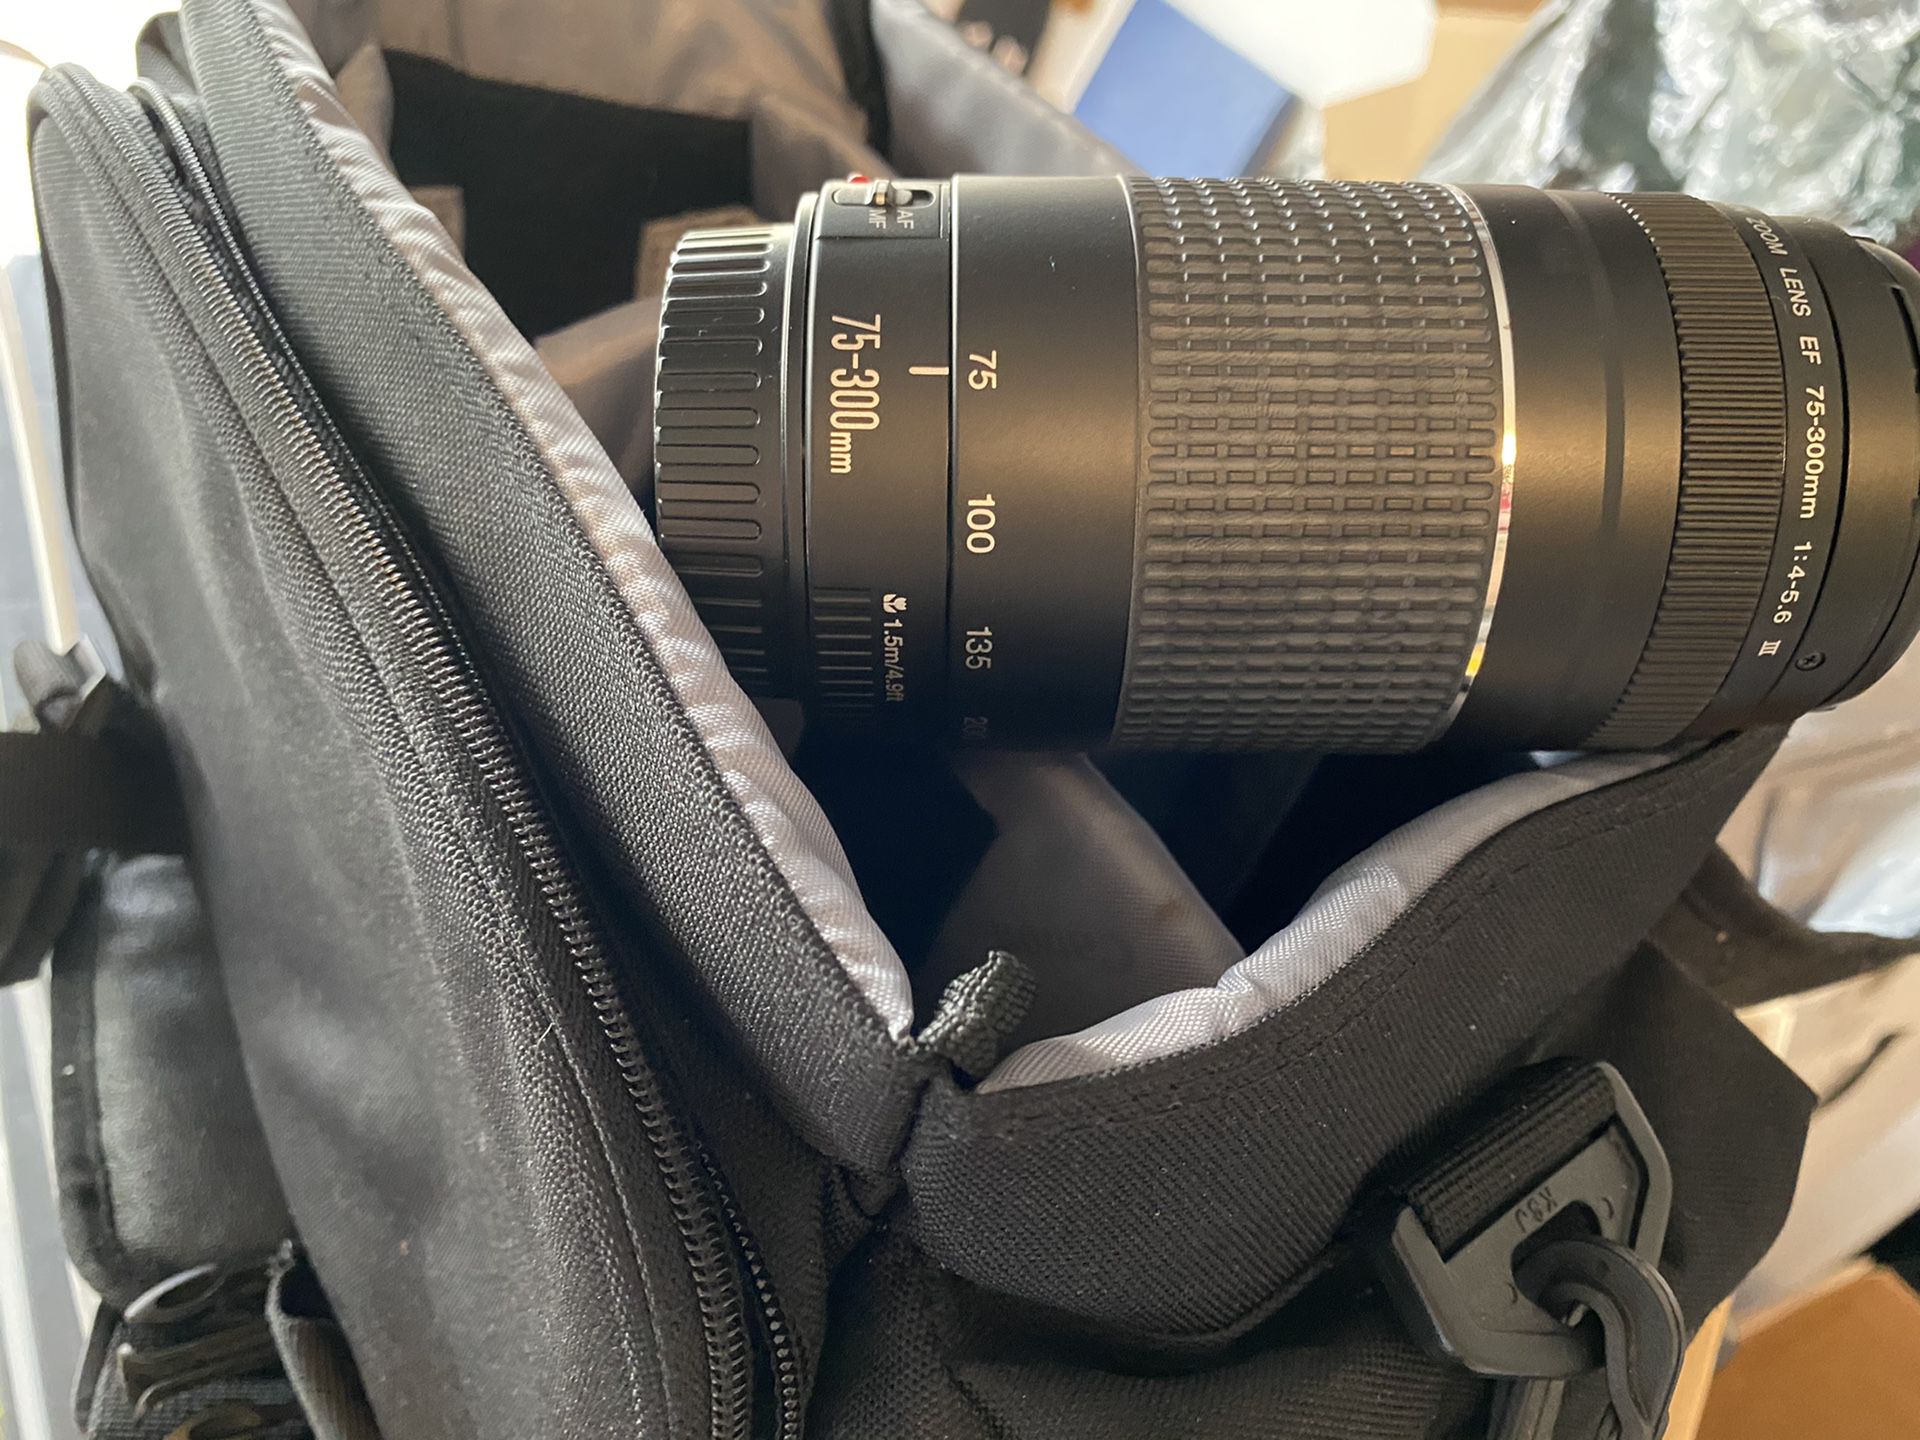 Canon safe travel bag and 75-300mm lenses